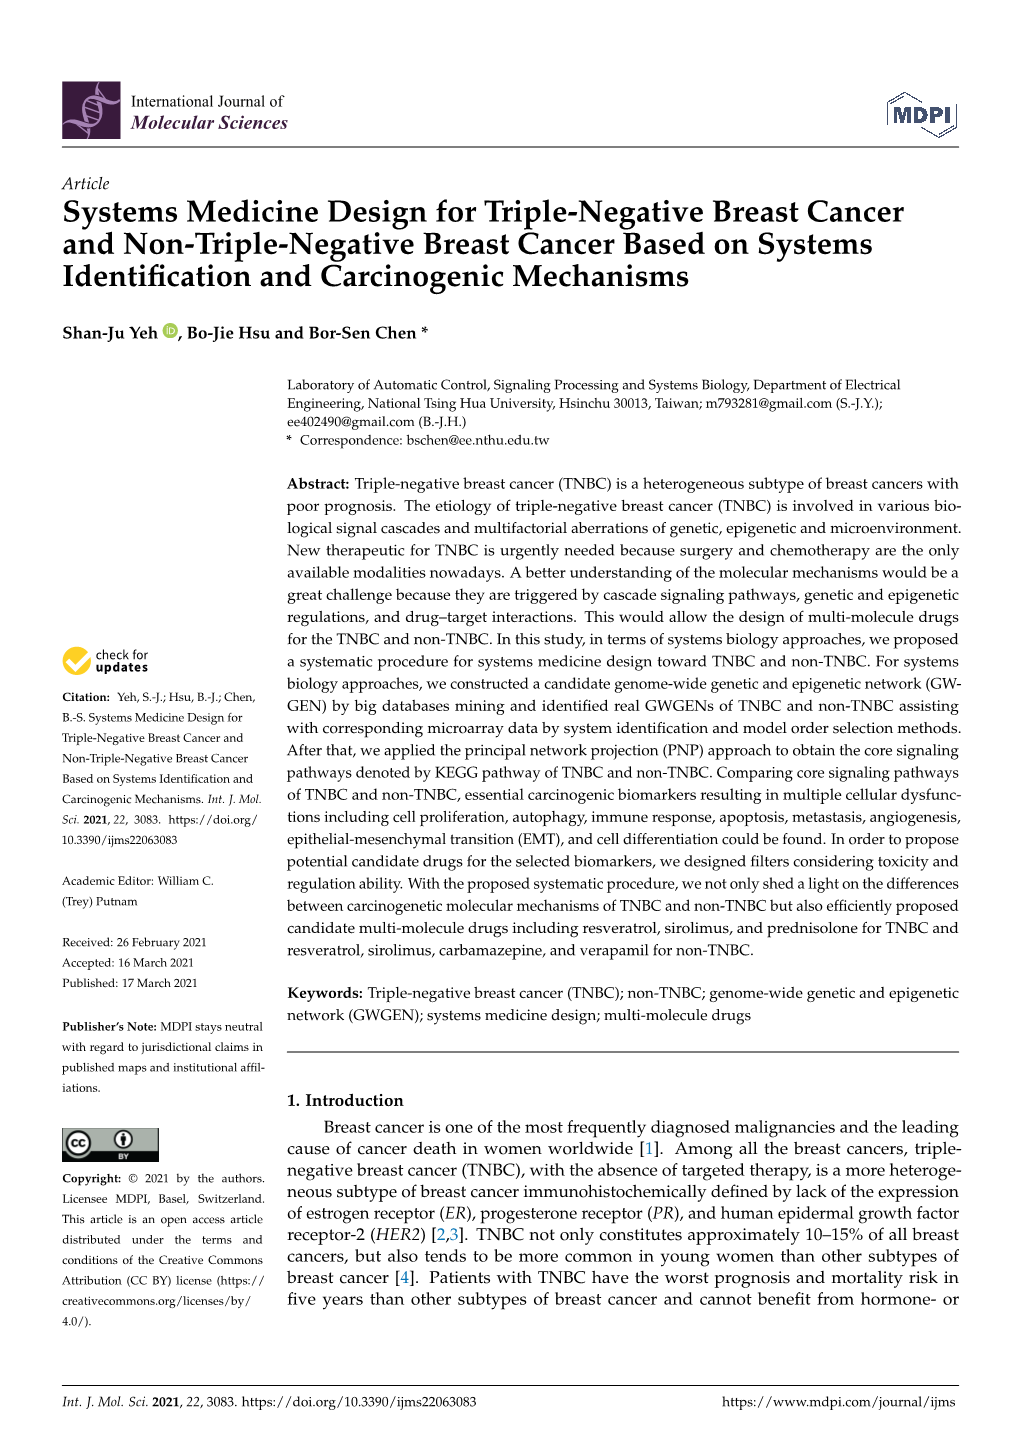 Systems Medicine Design for Triple-Negative Breast Cancer and Non-Triple-Negative Breast Cancer Based on Systems Identiﬁcation and Carcinogenic Mechanisms